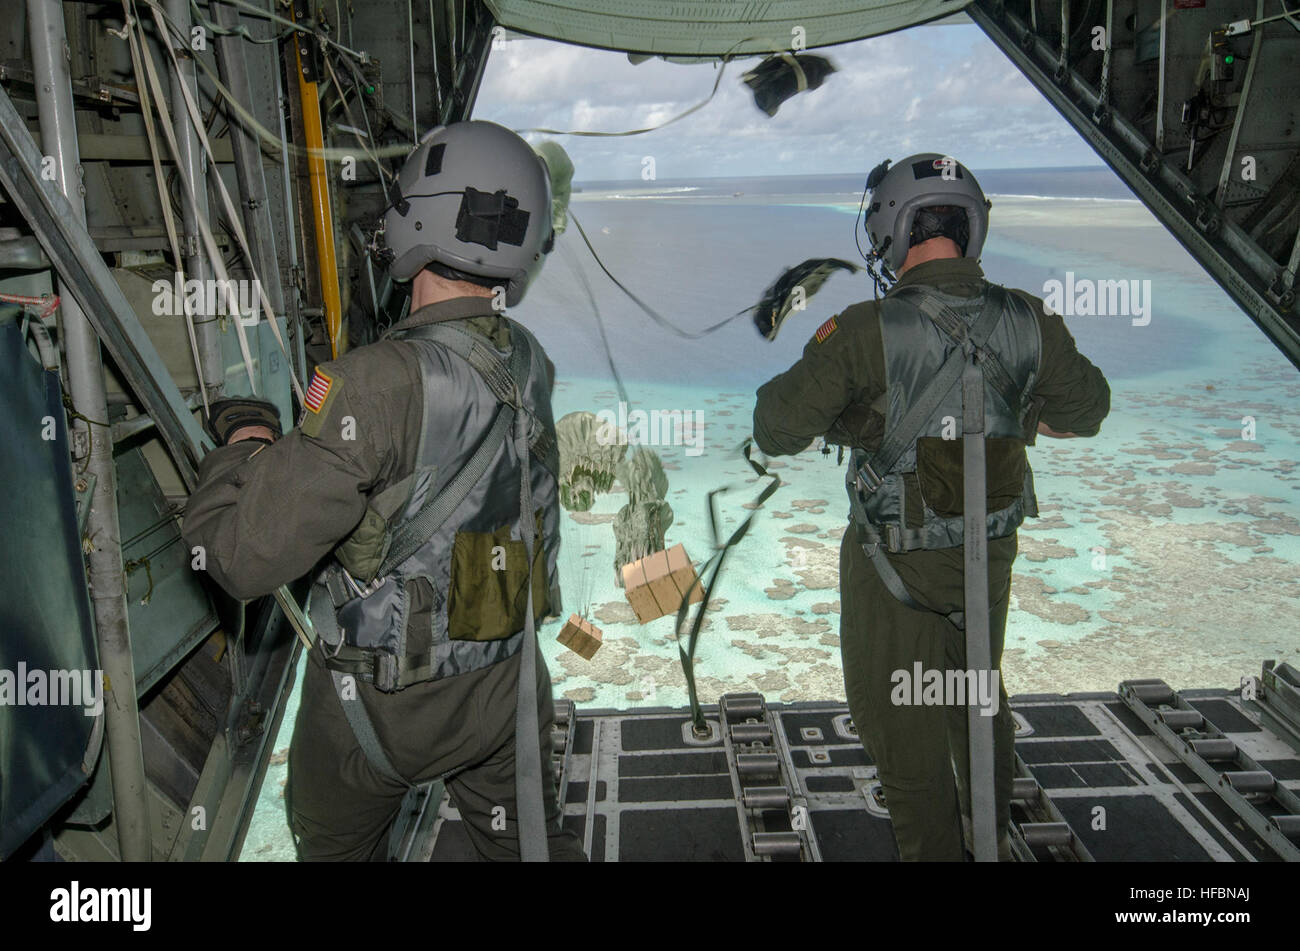 161211-N-YM720-059  FEDERATED STATES OF MICRONESIA (Dec. 12, 2016) – Loadmasters attached to the 36th Airlift Squadron, Yokota Air Base, Japan, drop care packages out of a C-130H Hercules to a Micronesian island during Operation Christmas Drop Dec. 11.  Operation Christmas Drop is an international humanitarian operation that provides critical supplies to 56 islands through the Commonwealth of the Northern Marianas, Federated States of Micronesia and Republic of Palau, impacting about 20,000 people. (U.S. Navy photo by Petty Officer 2nd Class Allen Michael McNair/Released) 161211-N-YM720-059 16 Stock Photo